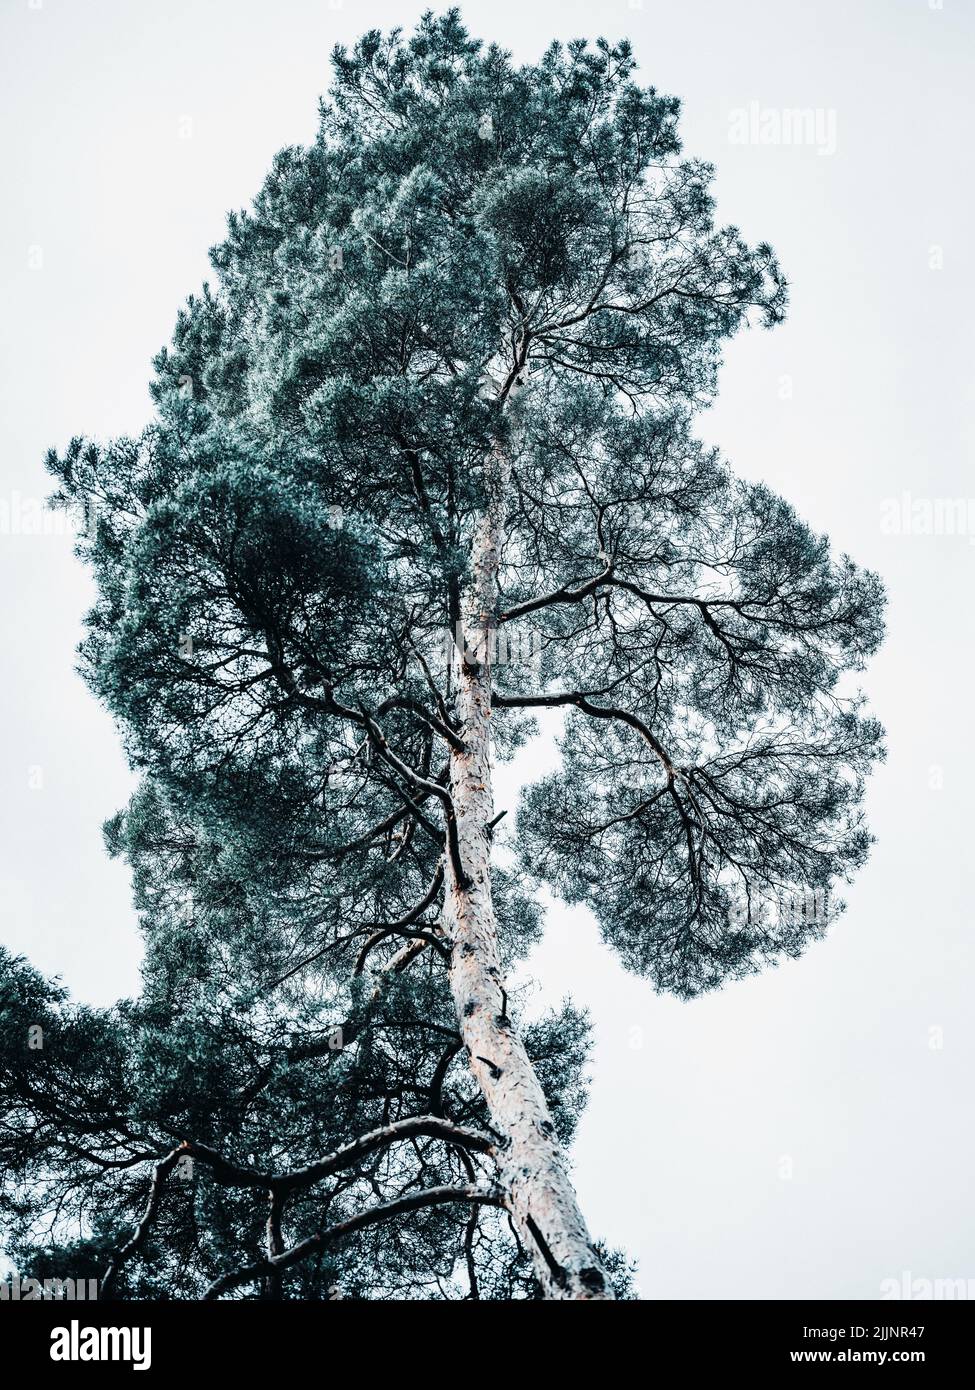 A vertical low angle shot of a pine tree in the forest Stock Photo